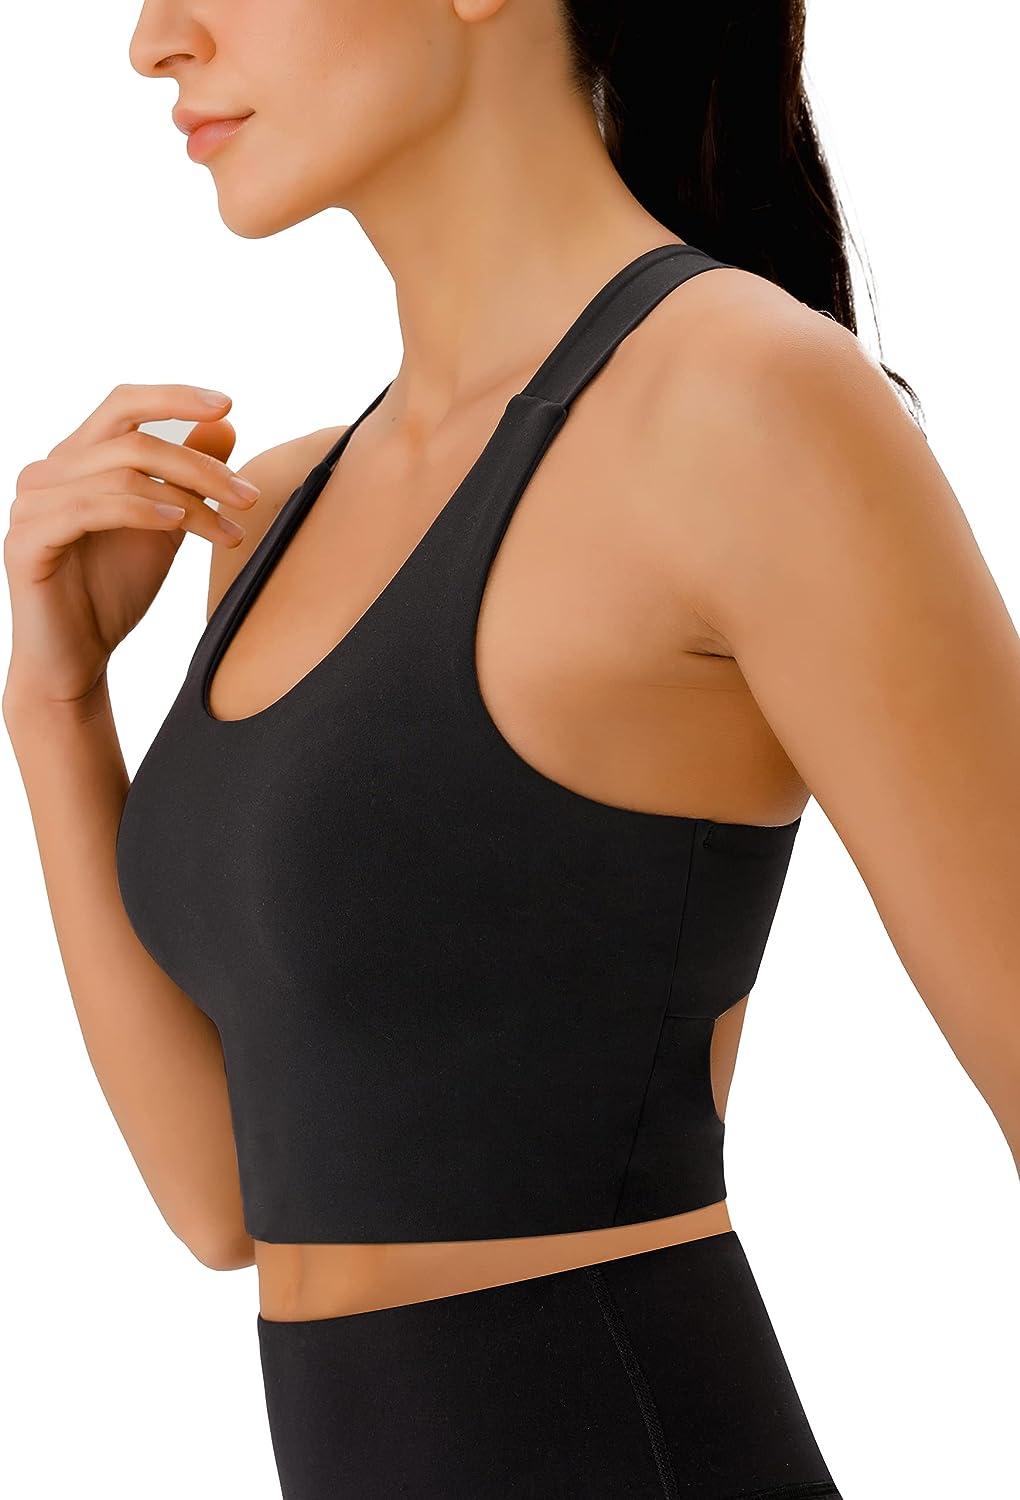 Is That The New Medium Support Criss-cross Cut Out Sports Bra